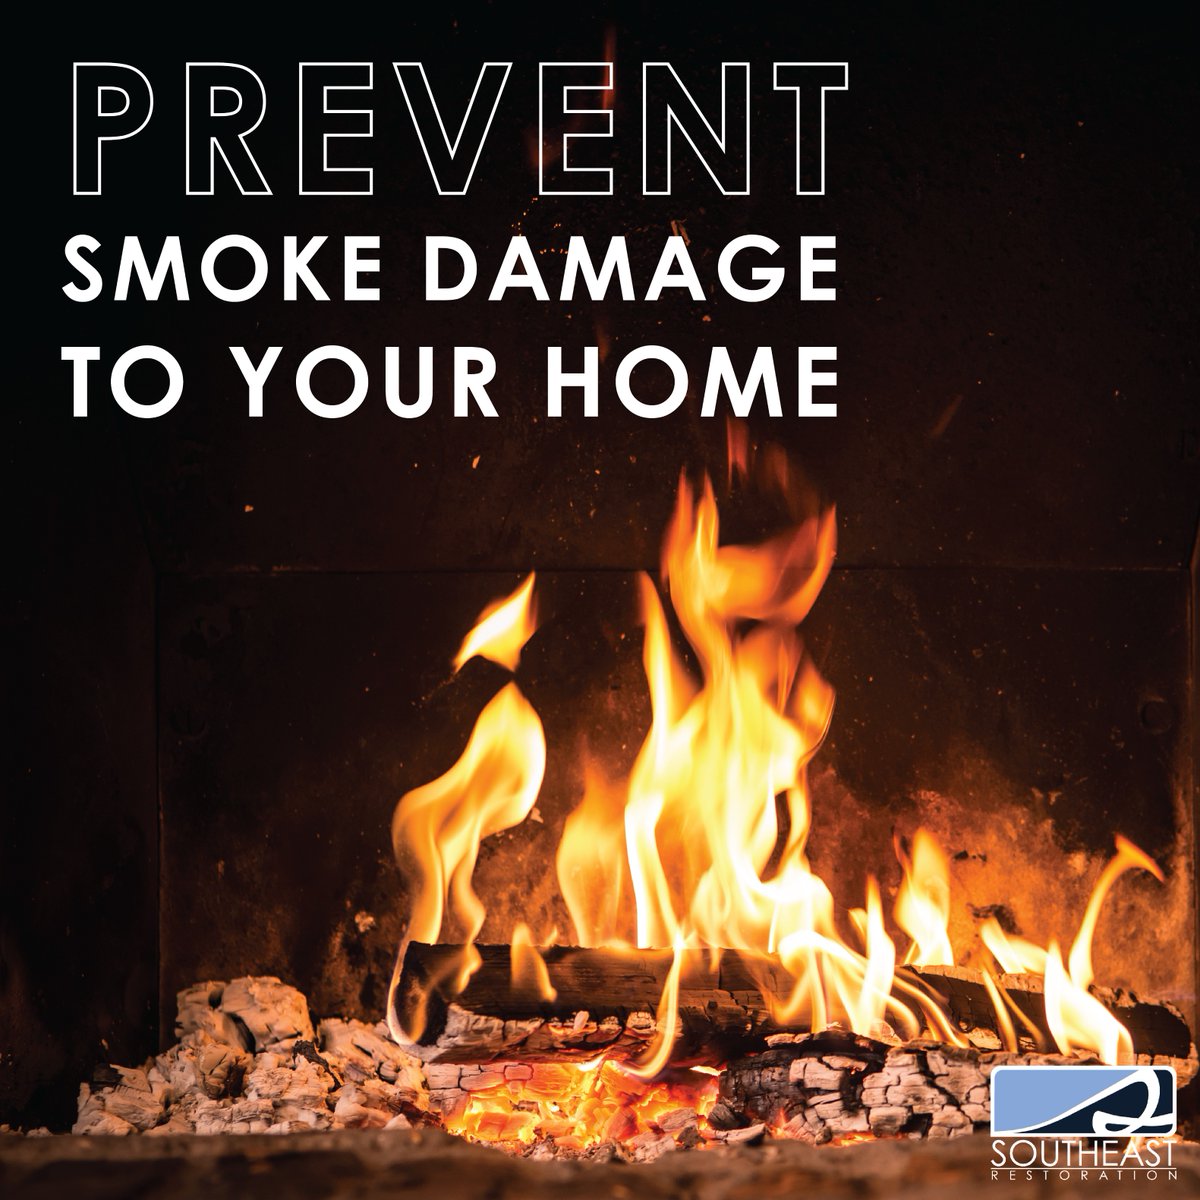 Cozying up by the fire is a great way to warm up, but ensure the flue is opened before you start it to prevent smoke damage to your home.

#homesafety #damageprevention #smokedamage